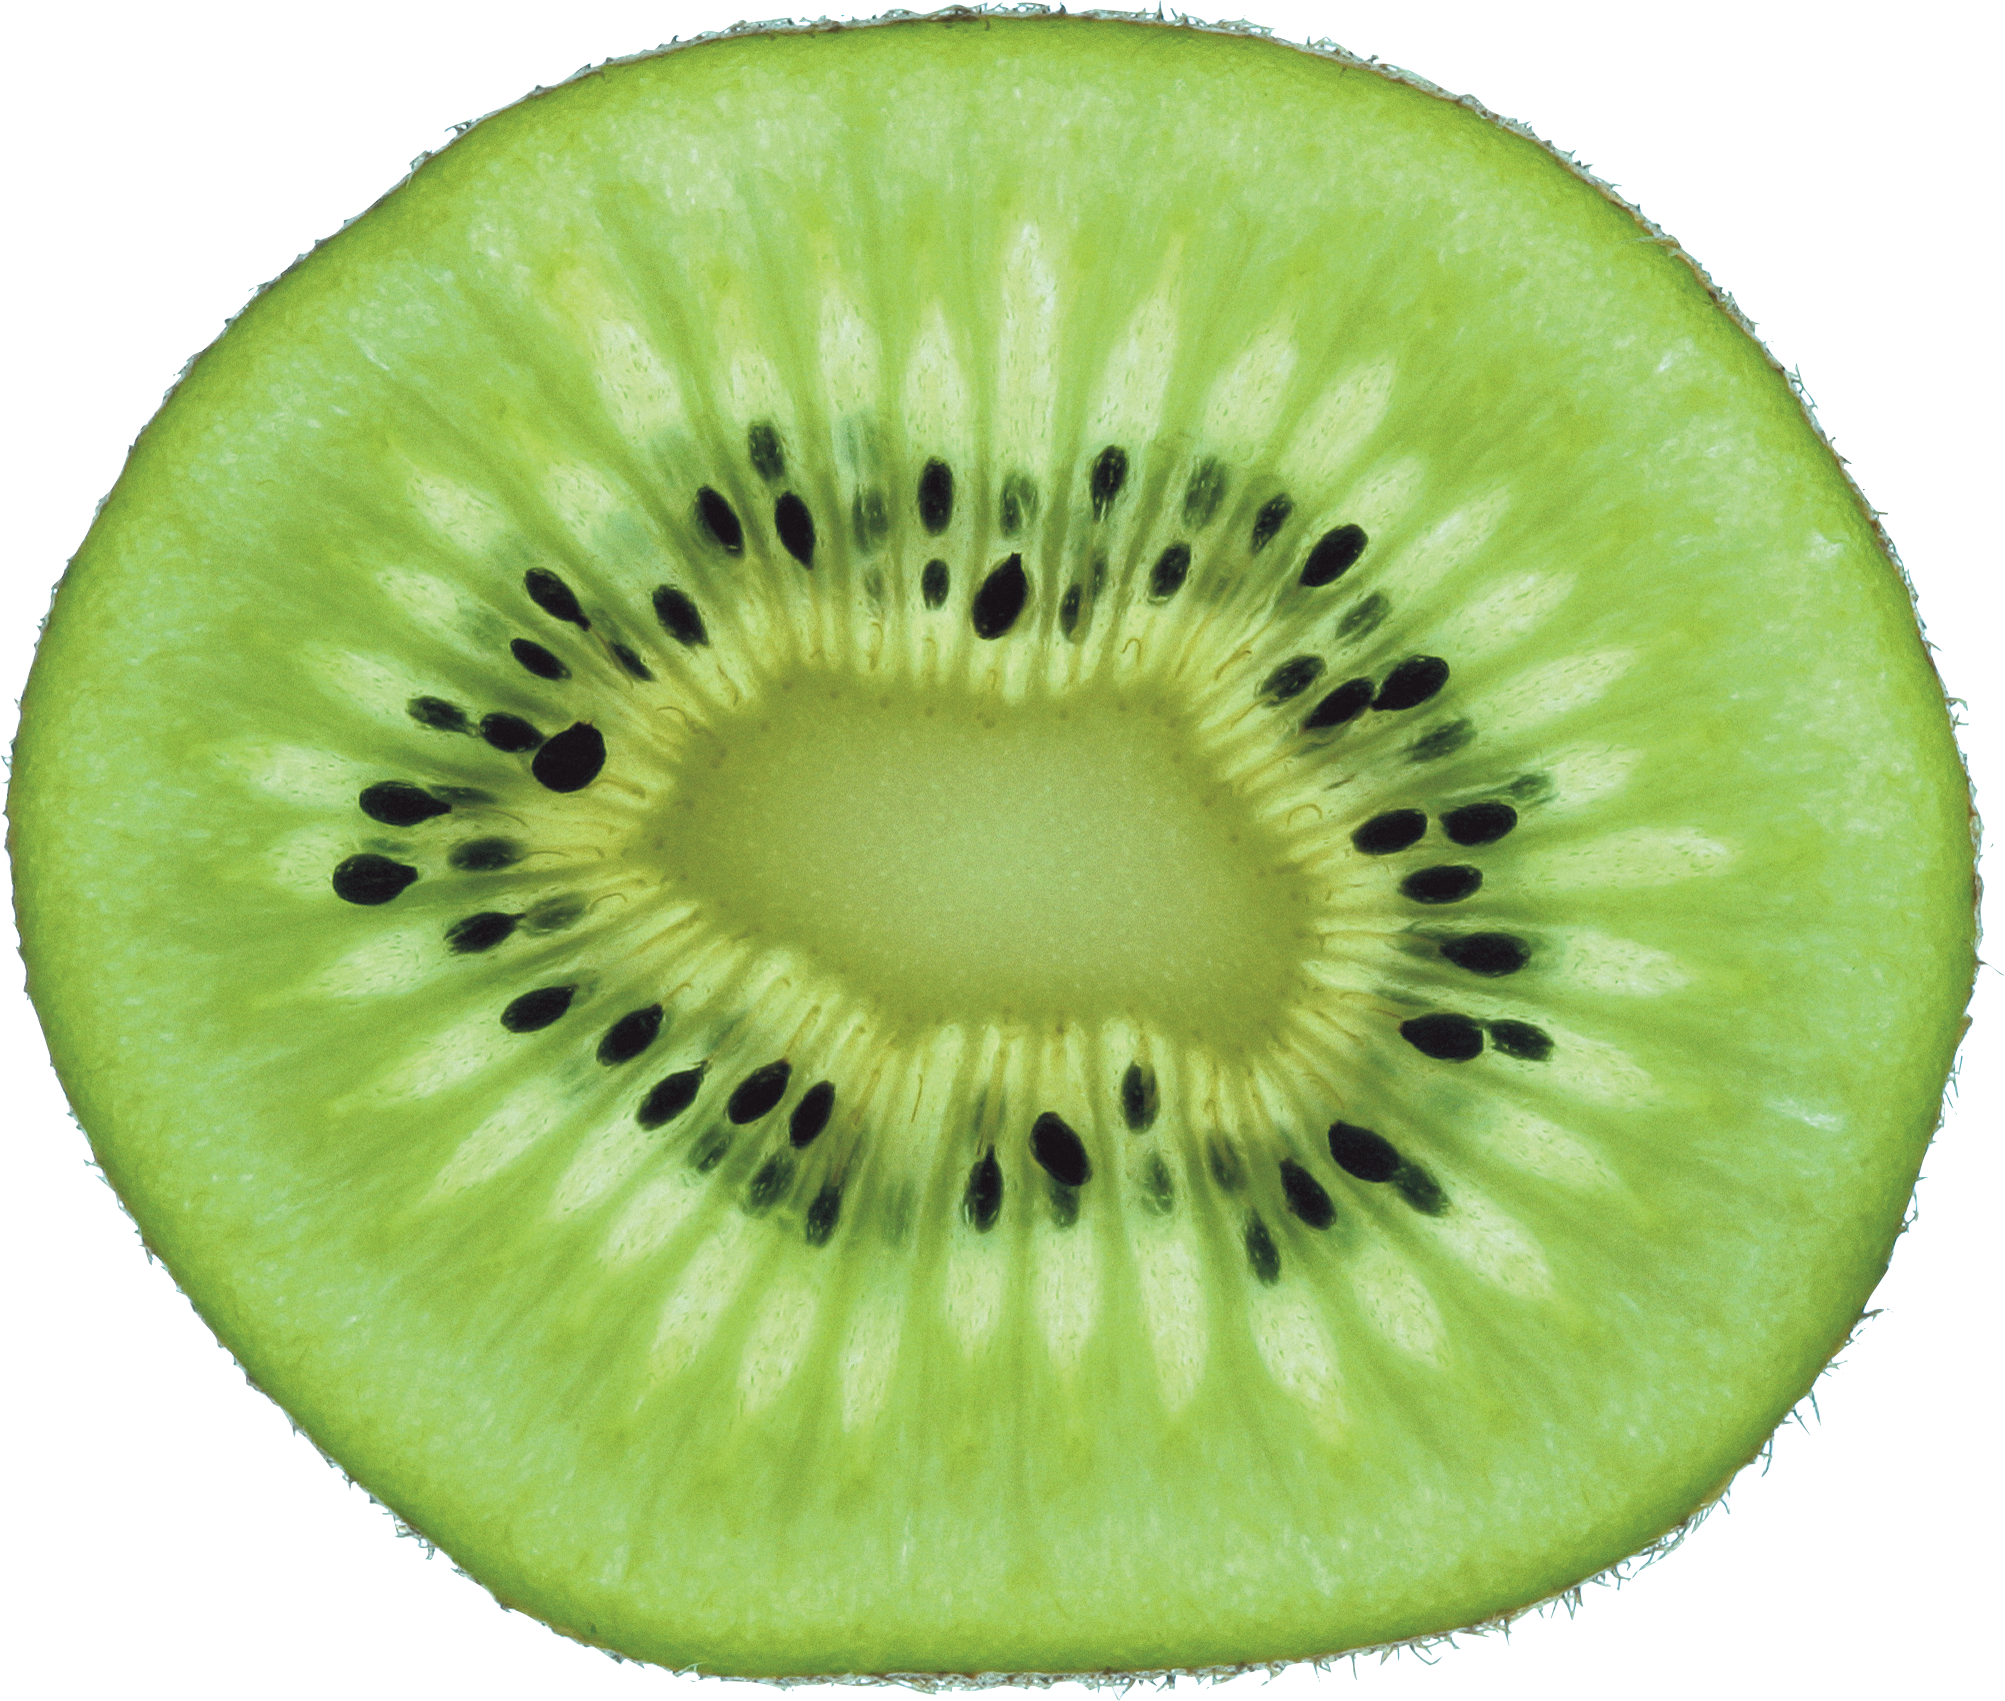 Green Cutted Kiwi Png Image - Kiwi Slice, Transparent background PNG HD thumbnail